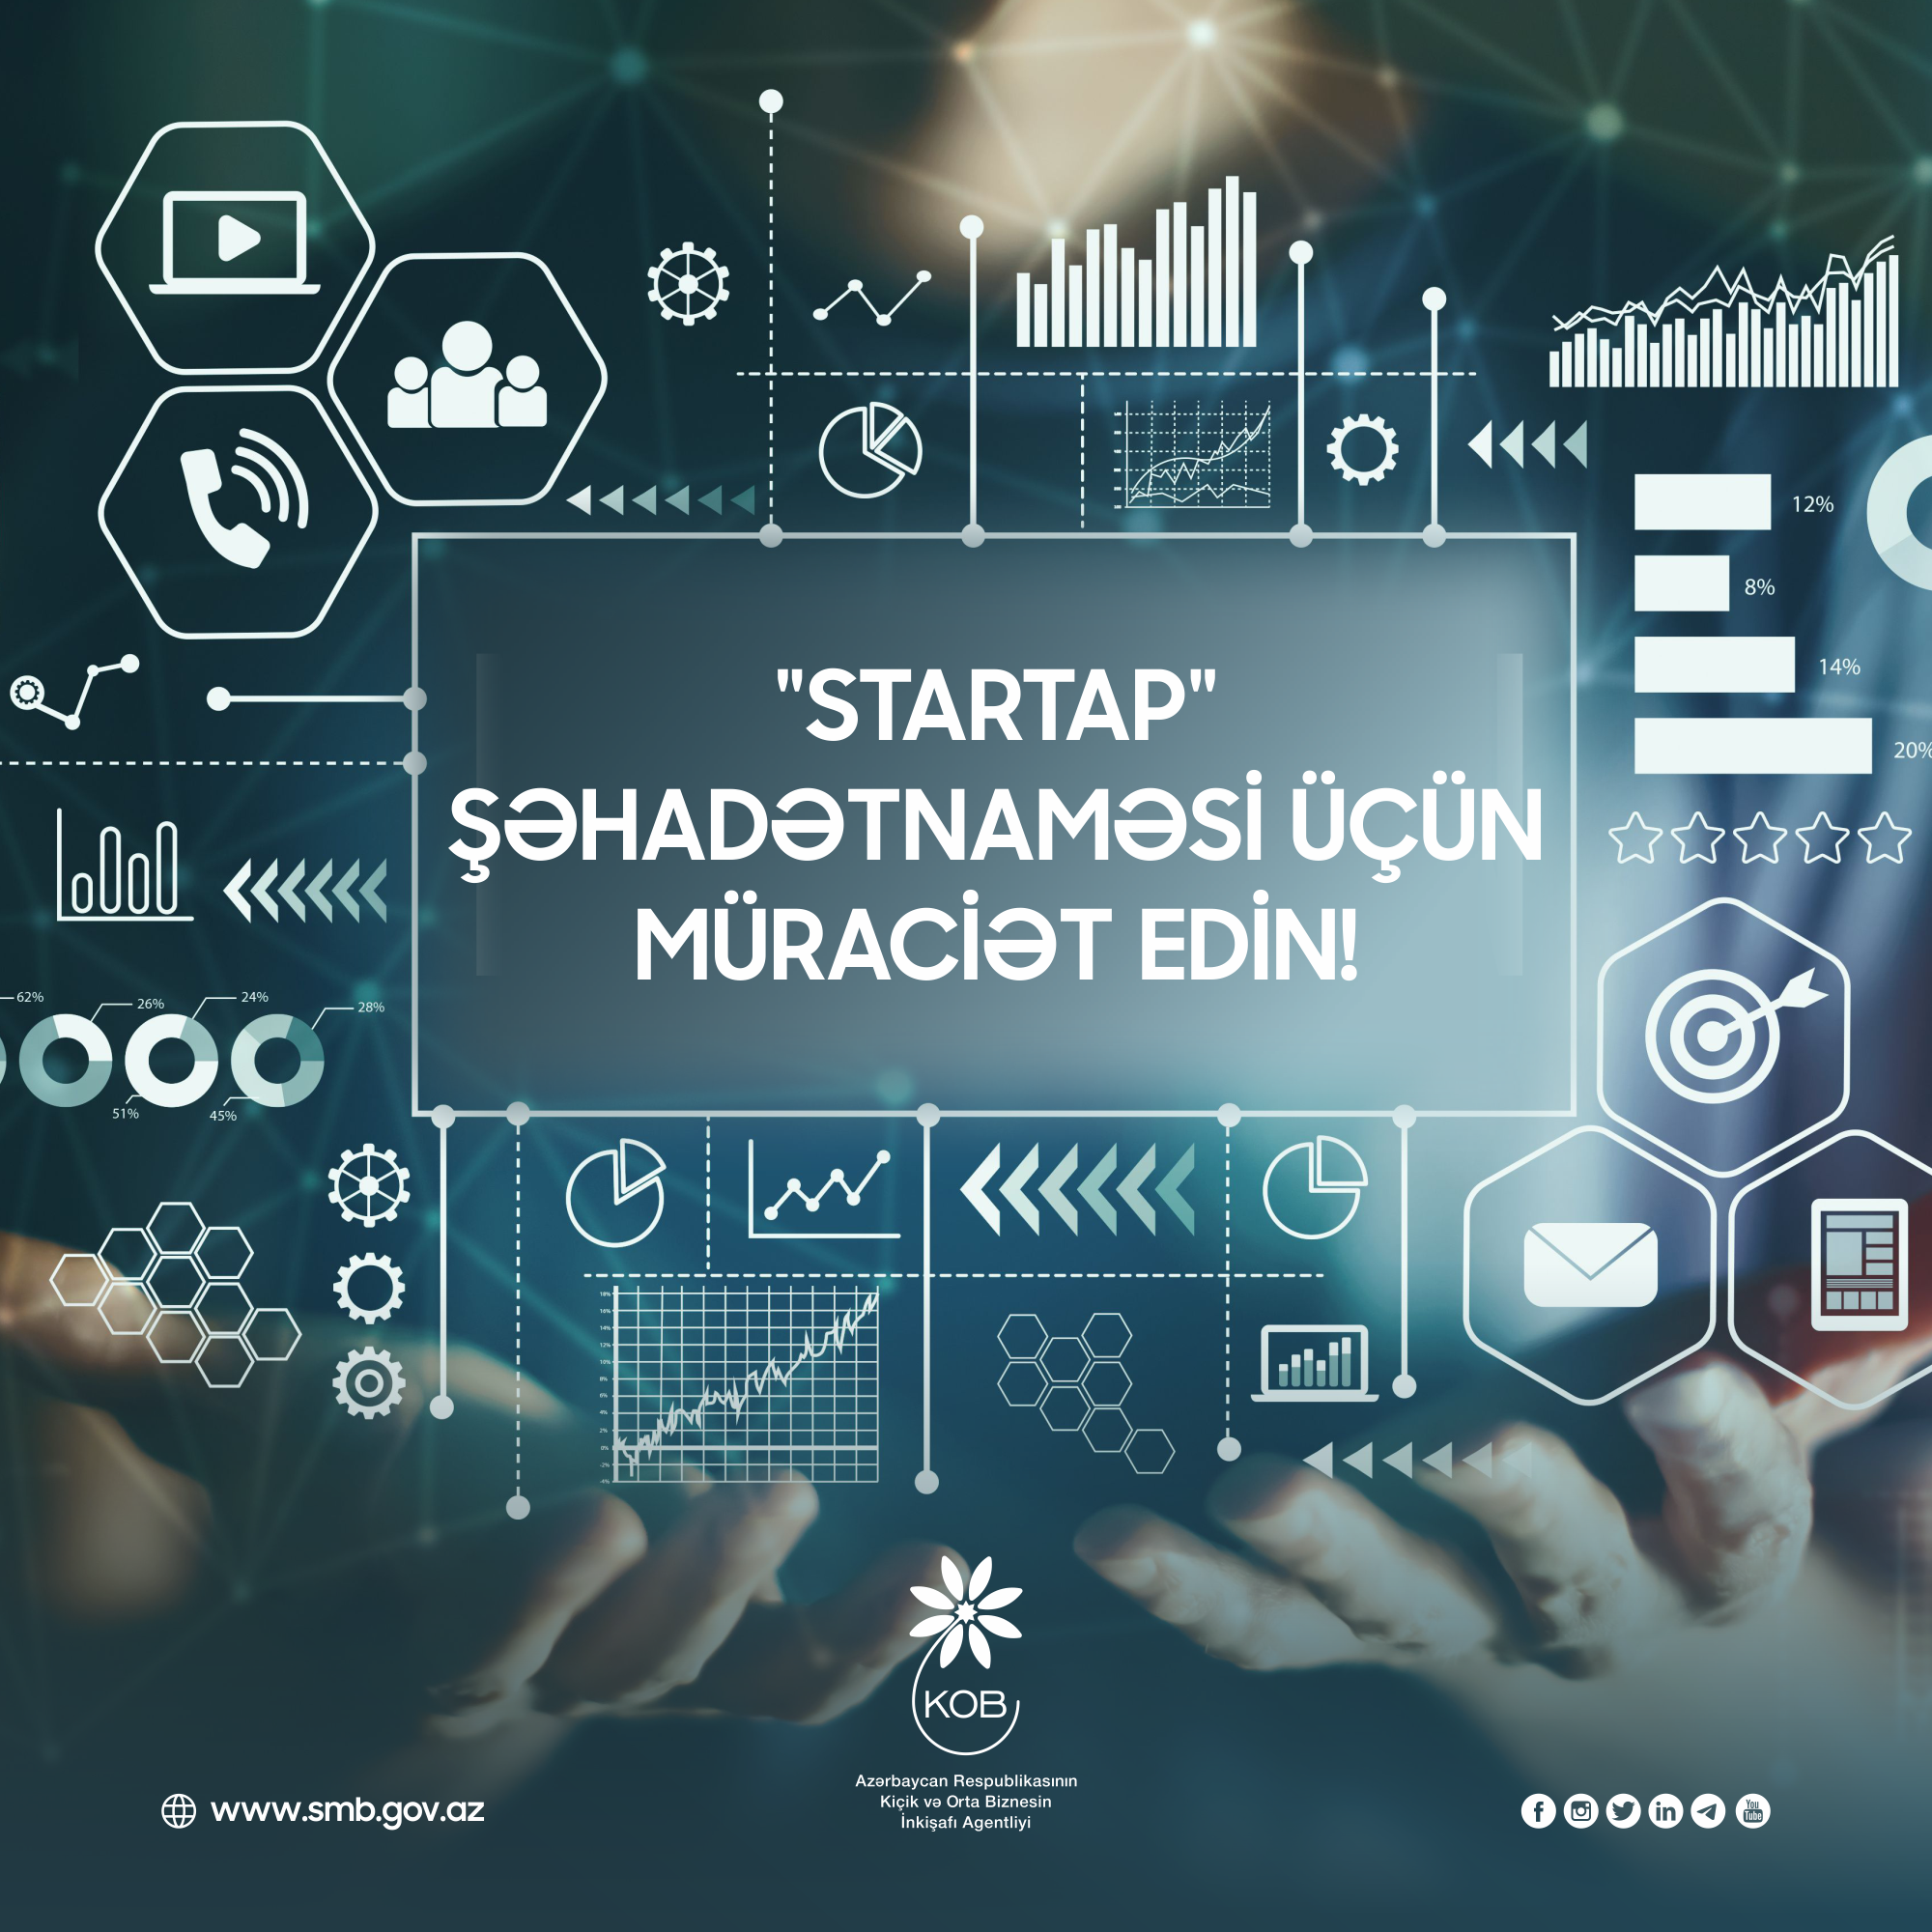 Entrepreneurs’ applications for “Startup” certificate have been considered 